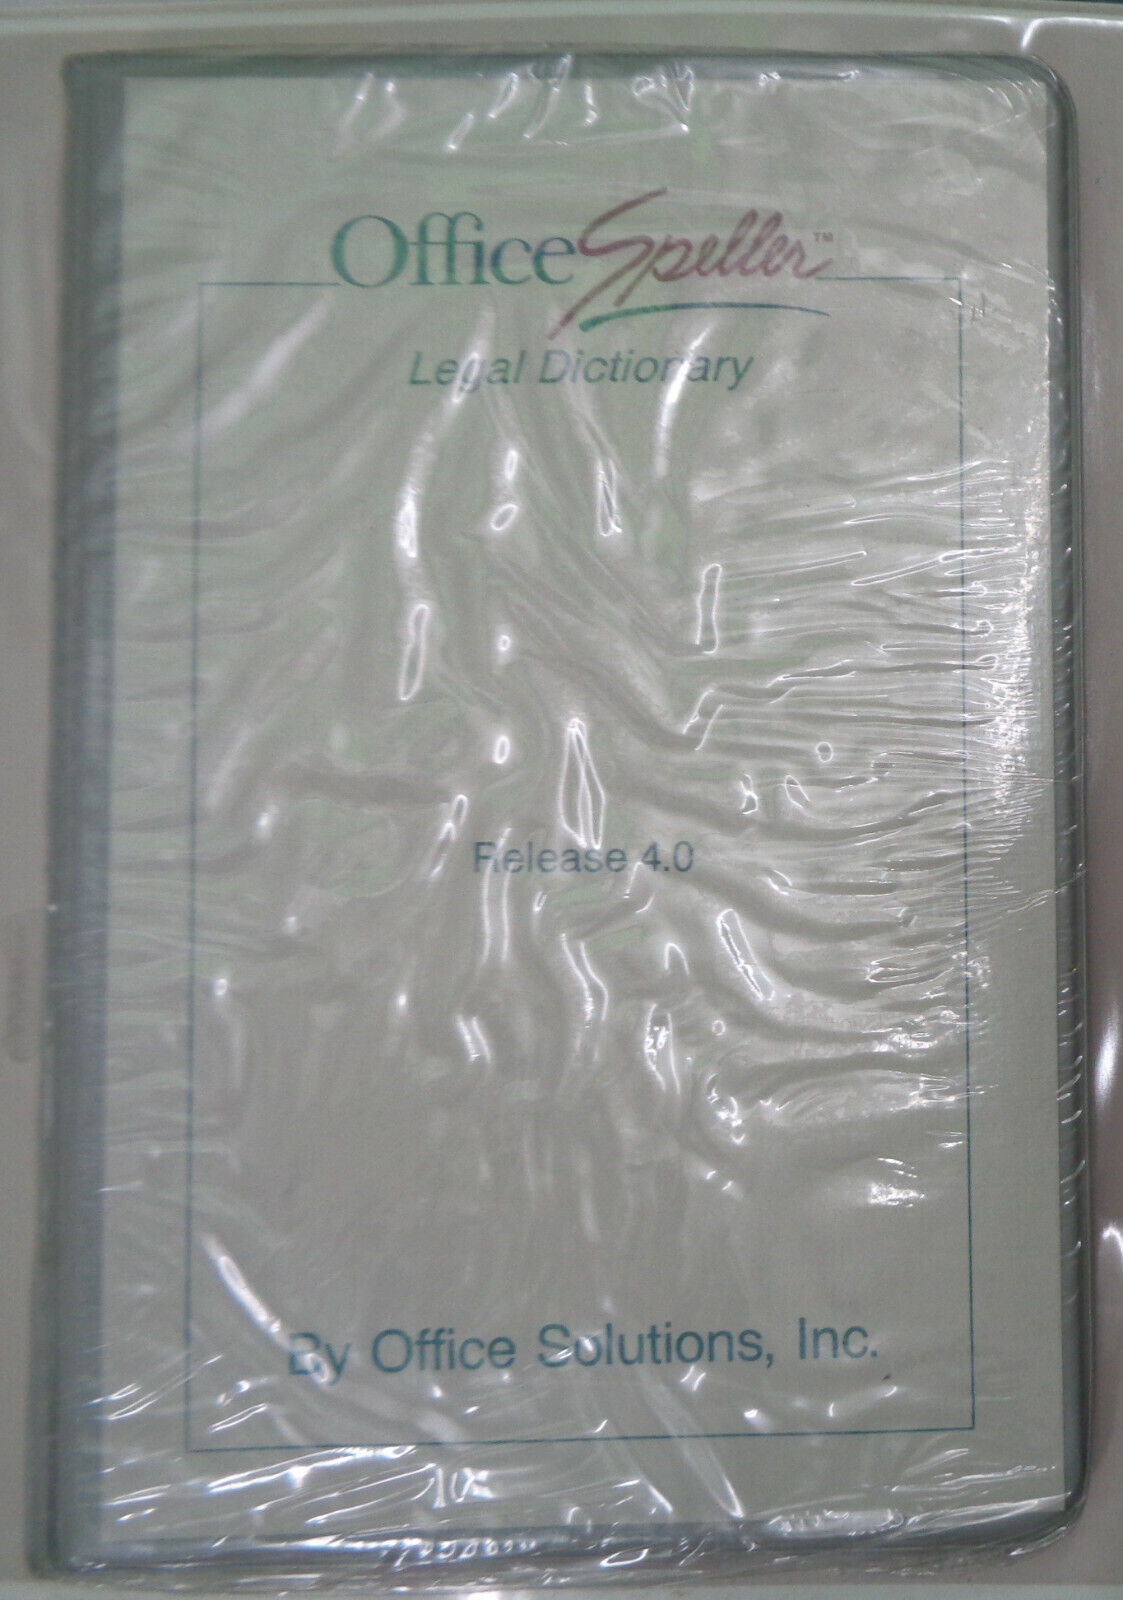 OfficeSpeller Legal Dictionary by Office Solutions 1985 Rel 4.0 for IBM - SEALED